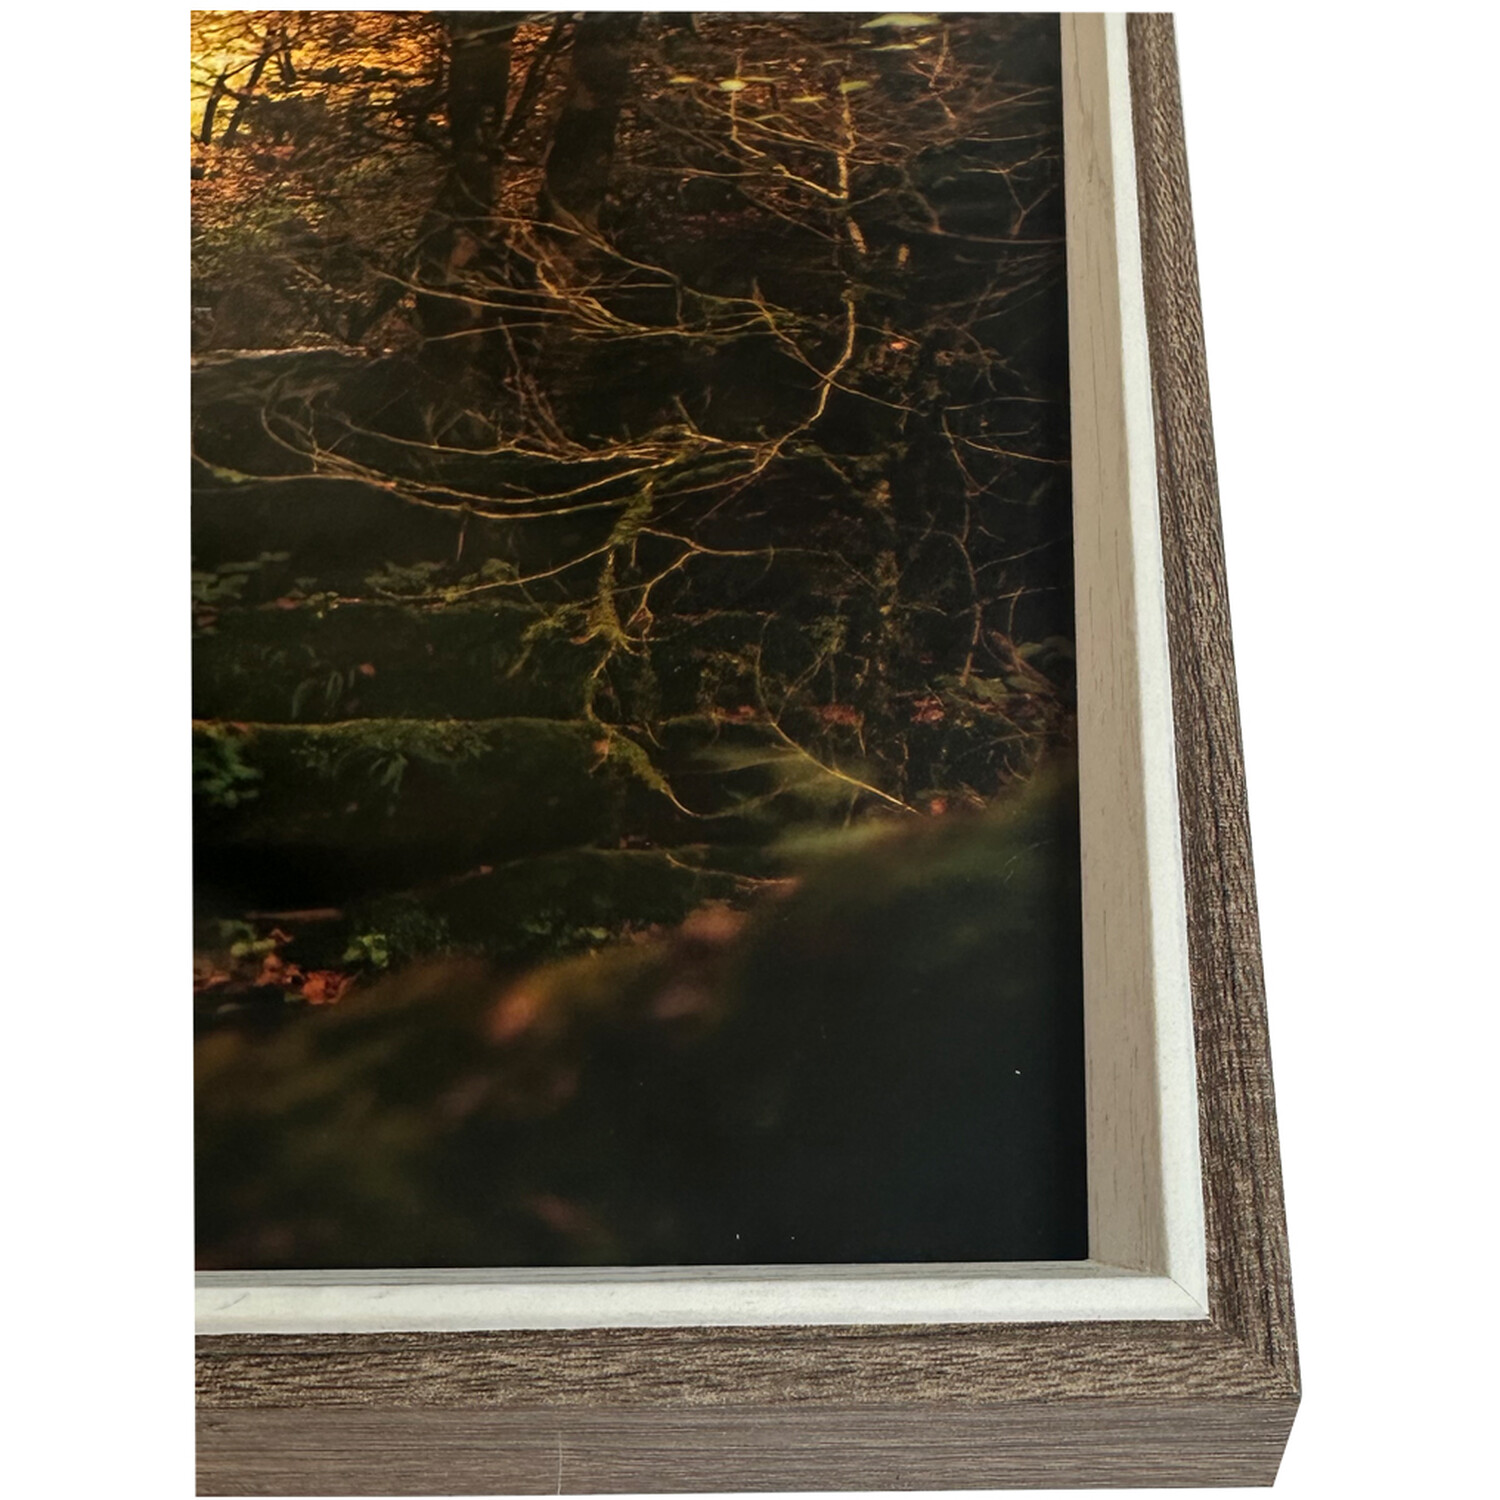 Zoey Rustic Wood Effect Frame - Brown / 6x4in Image 3